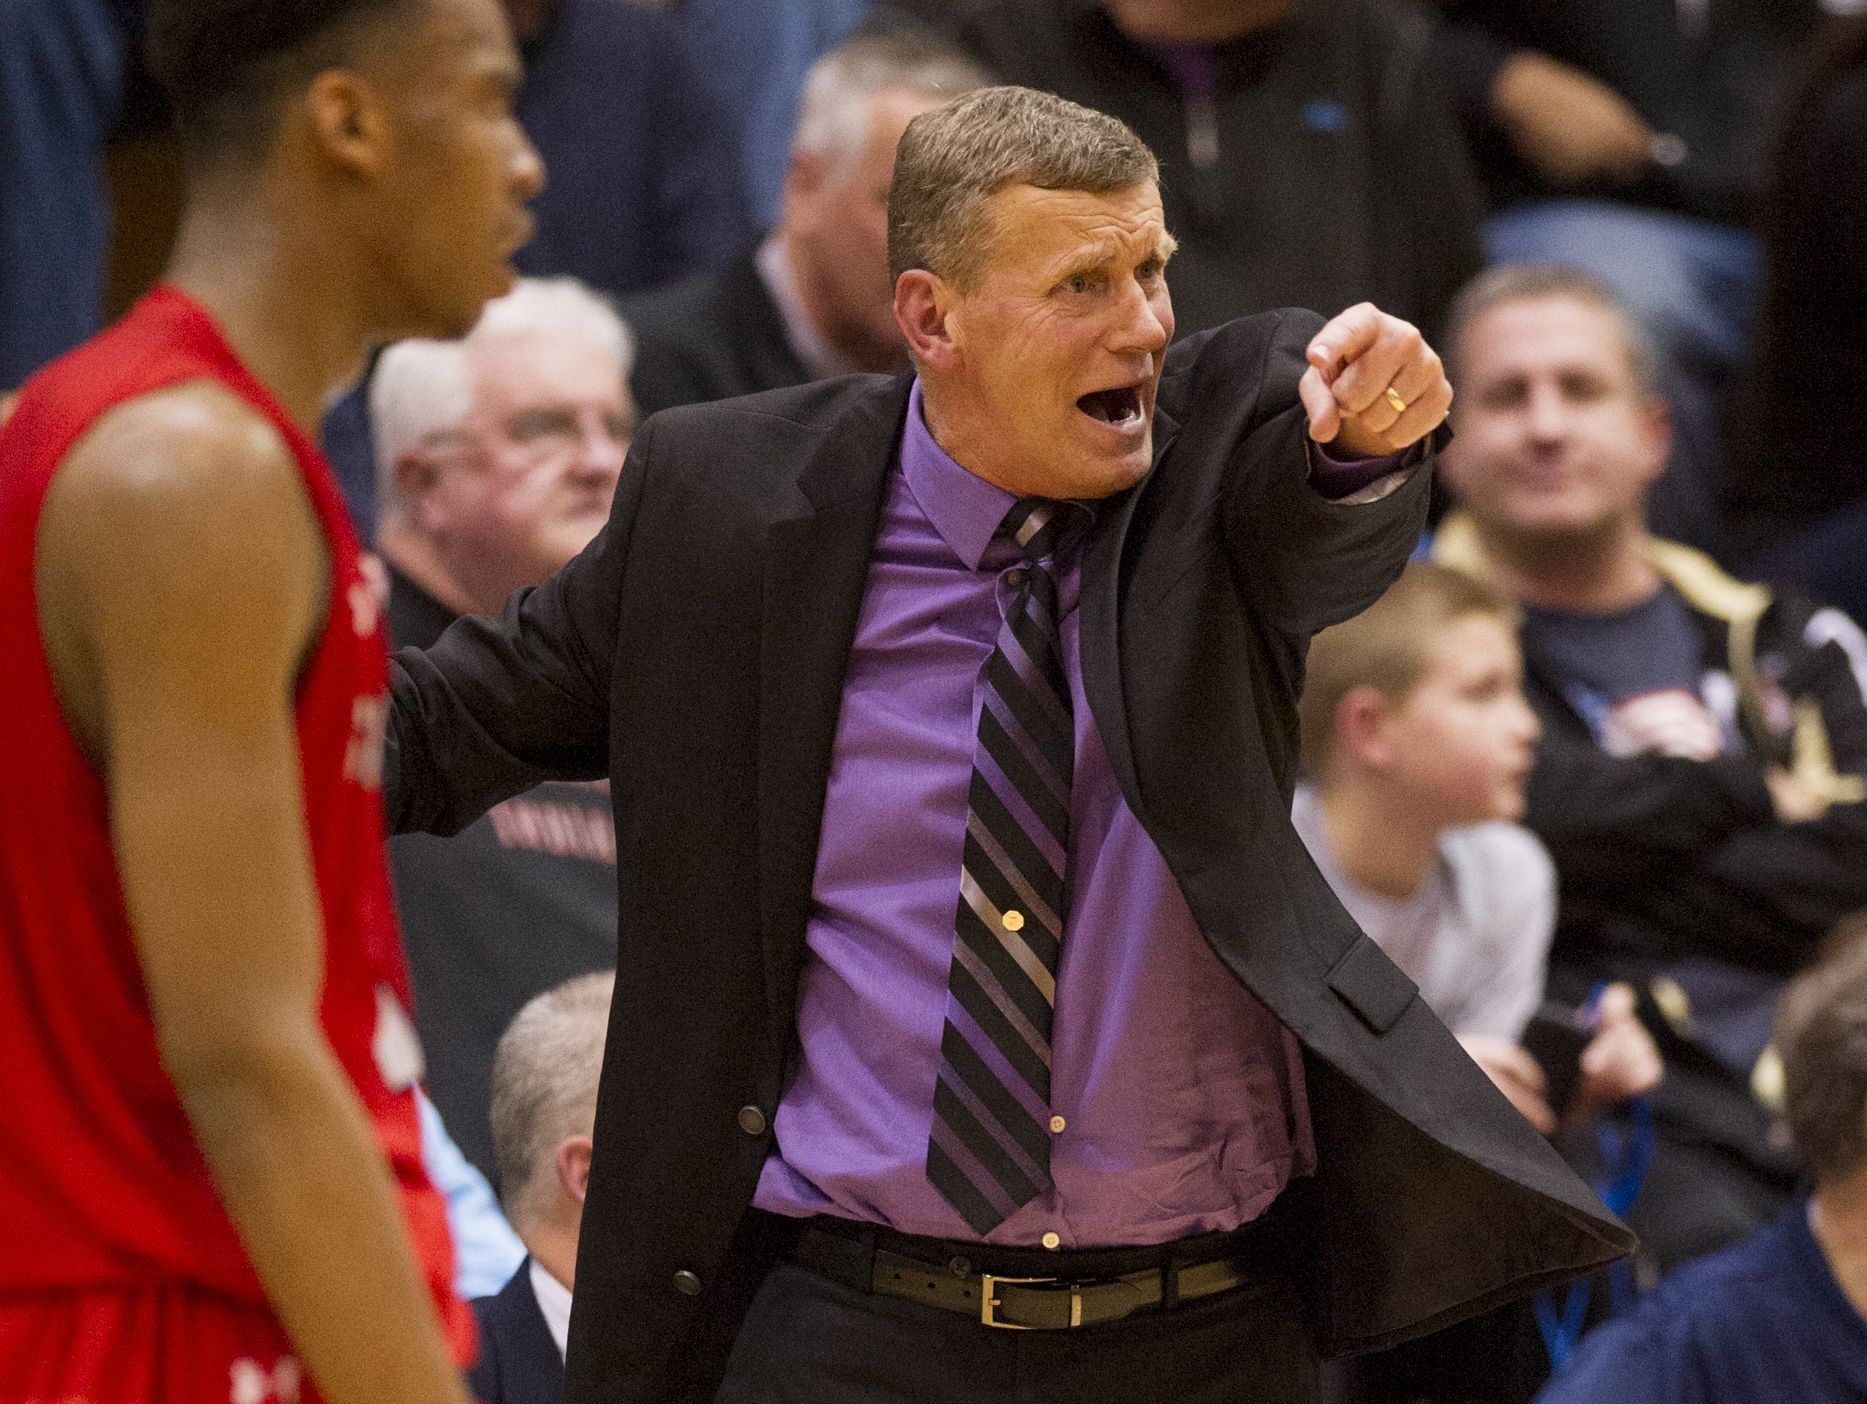 Ben Davis High School head coach Mark James reacts to the action on the court during the second half of action. Perry Meridian High School hosted a IHSAA Boy's Basketball 4A Sectional semi-final game, Friday, March 6, 2015. Southport won 45-27.